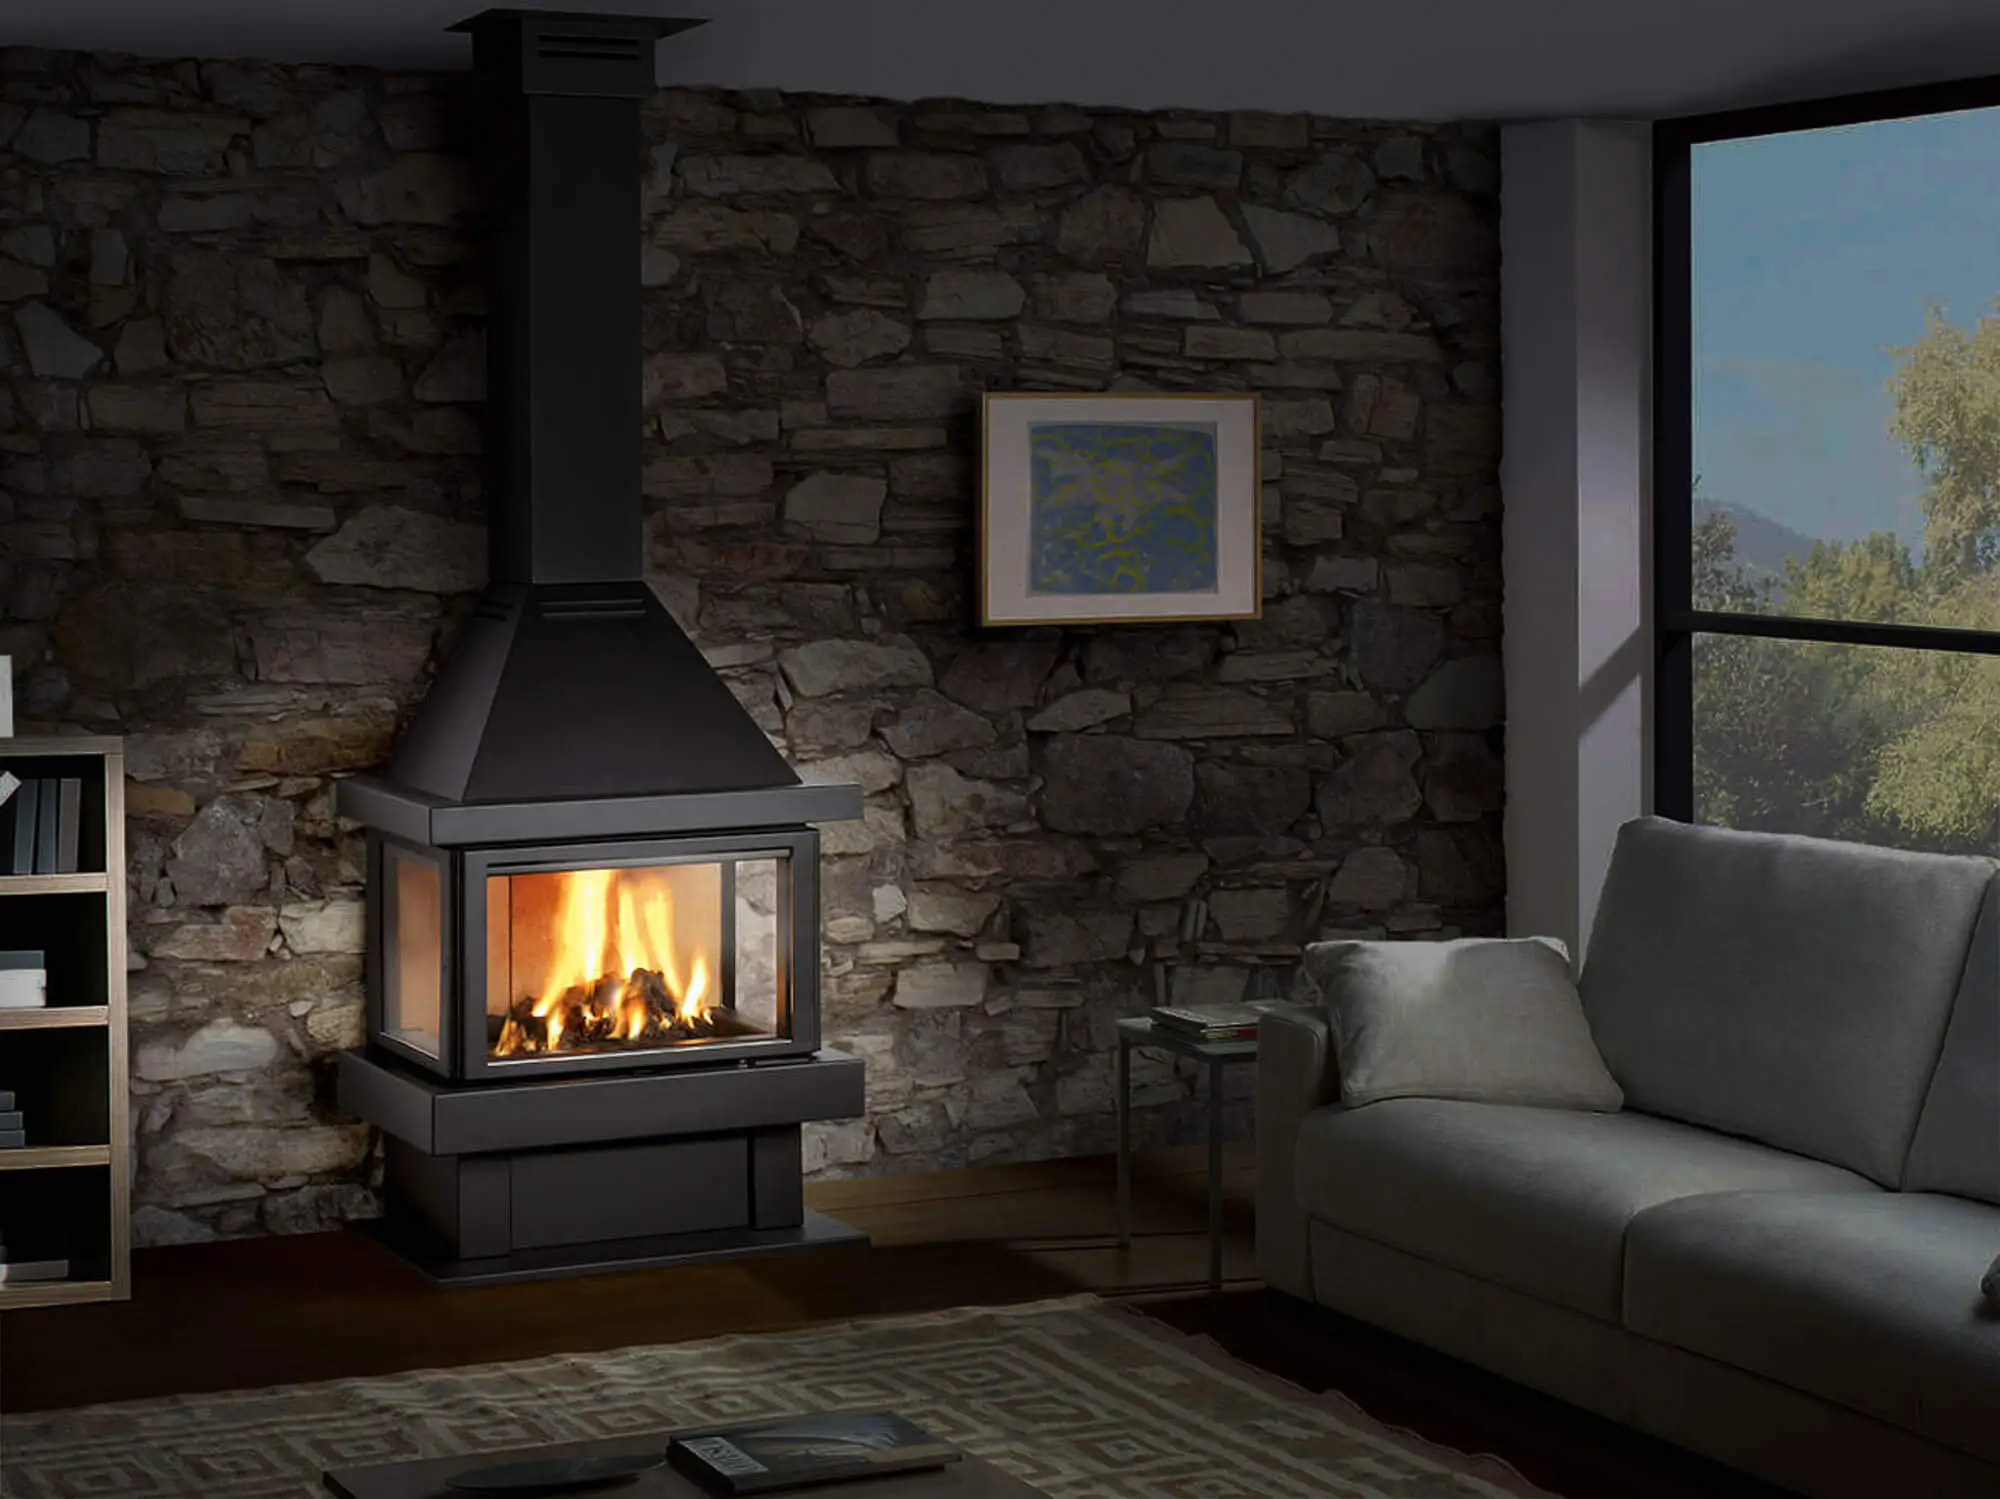  <h2 class='h1-custom' style='transform: rotateX(0deg) translate(0px, 0px); opacity: 1;'></noscript>The Benefits of a Closed Combustion Fireplace</h2><span class='subheading'>How It Can Improve Your Home's Energy Efficiency</span>